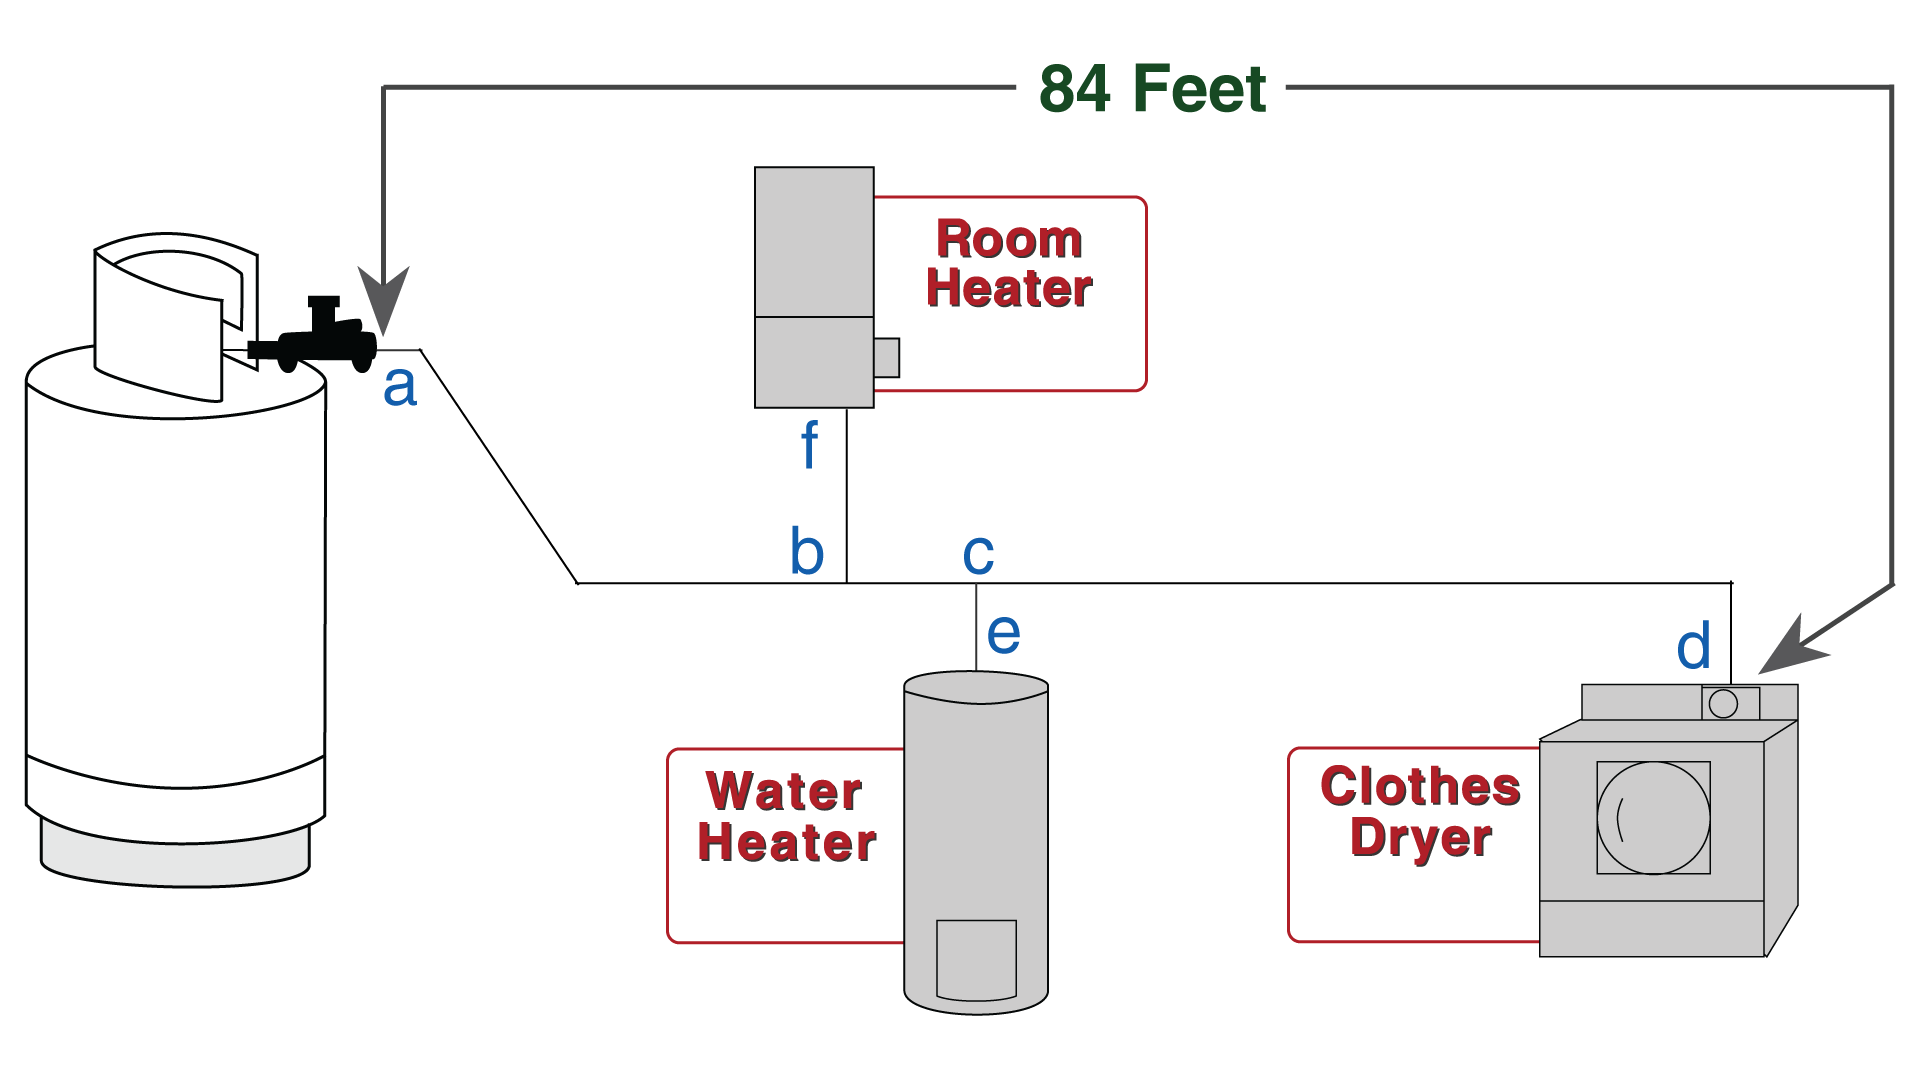 Sketch showing that it's 84 feet from regulator to the building.